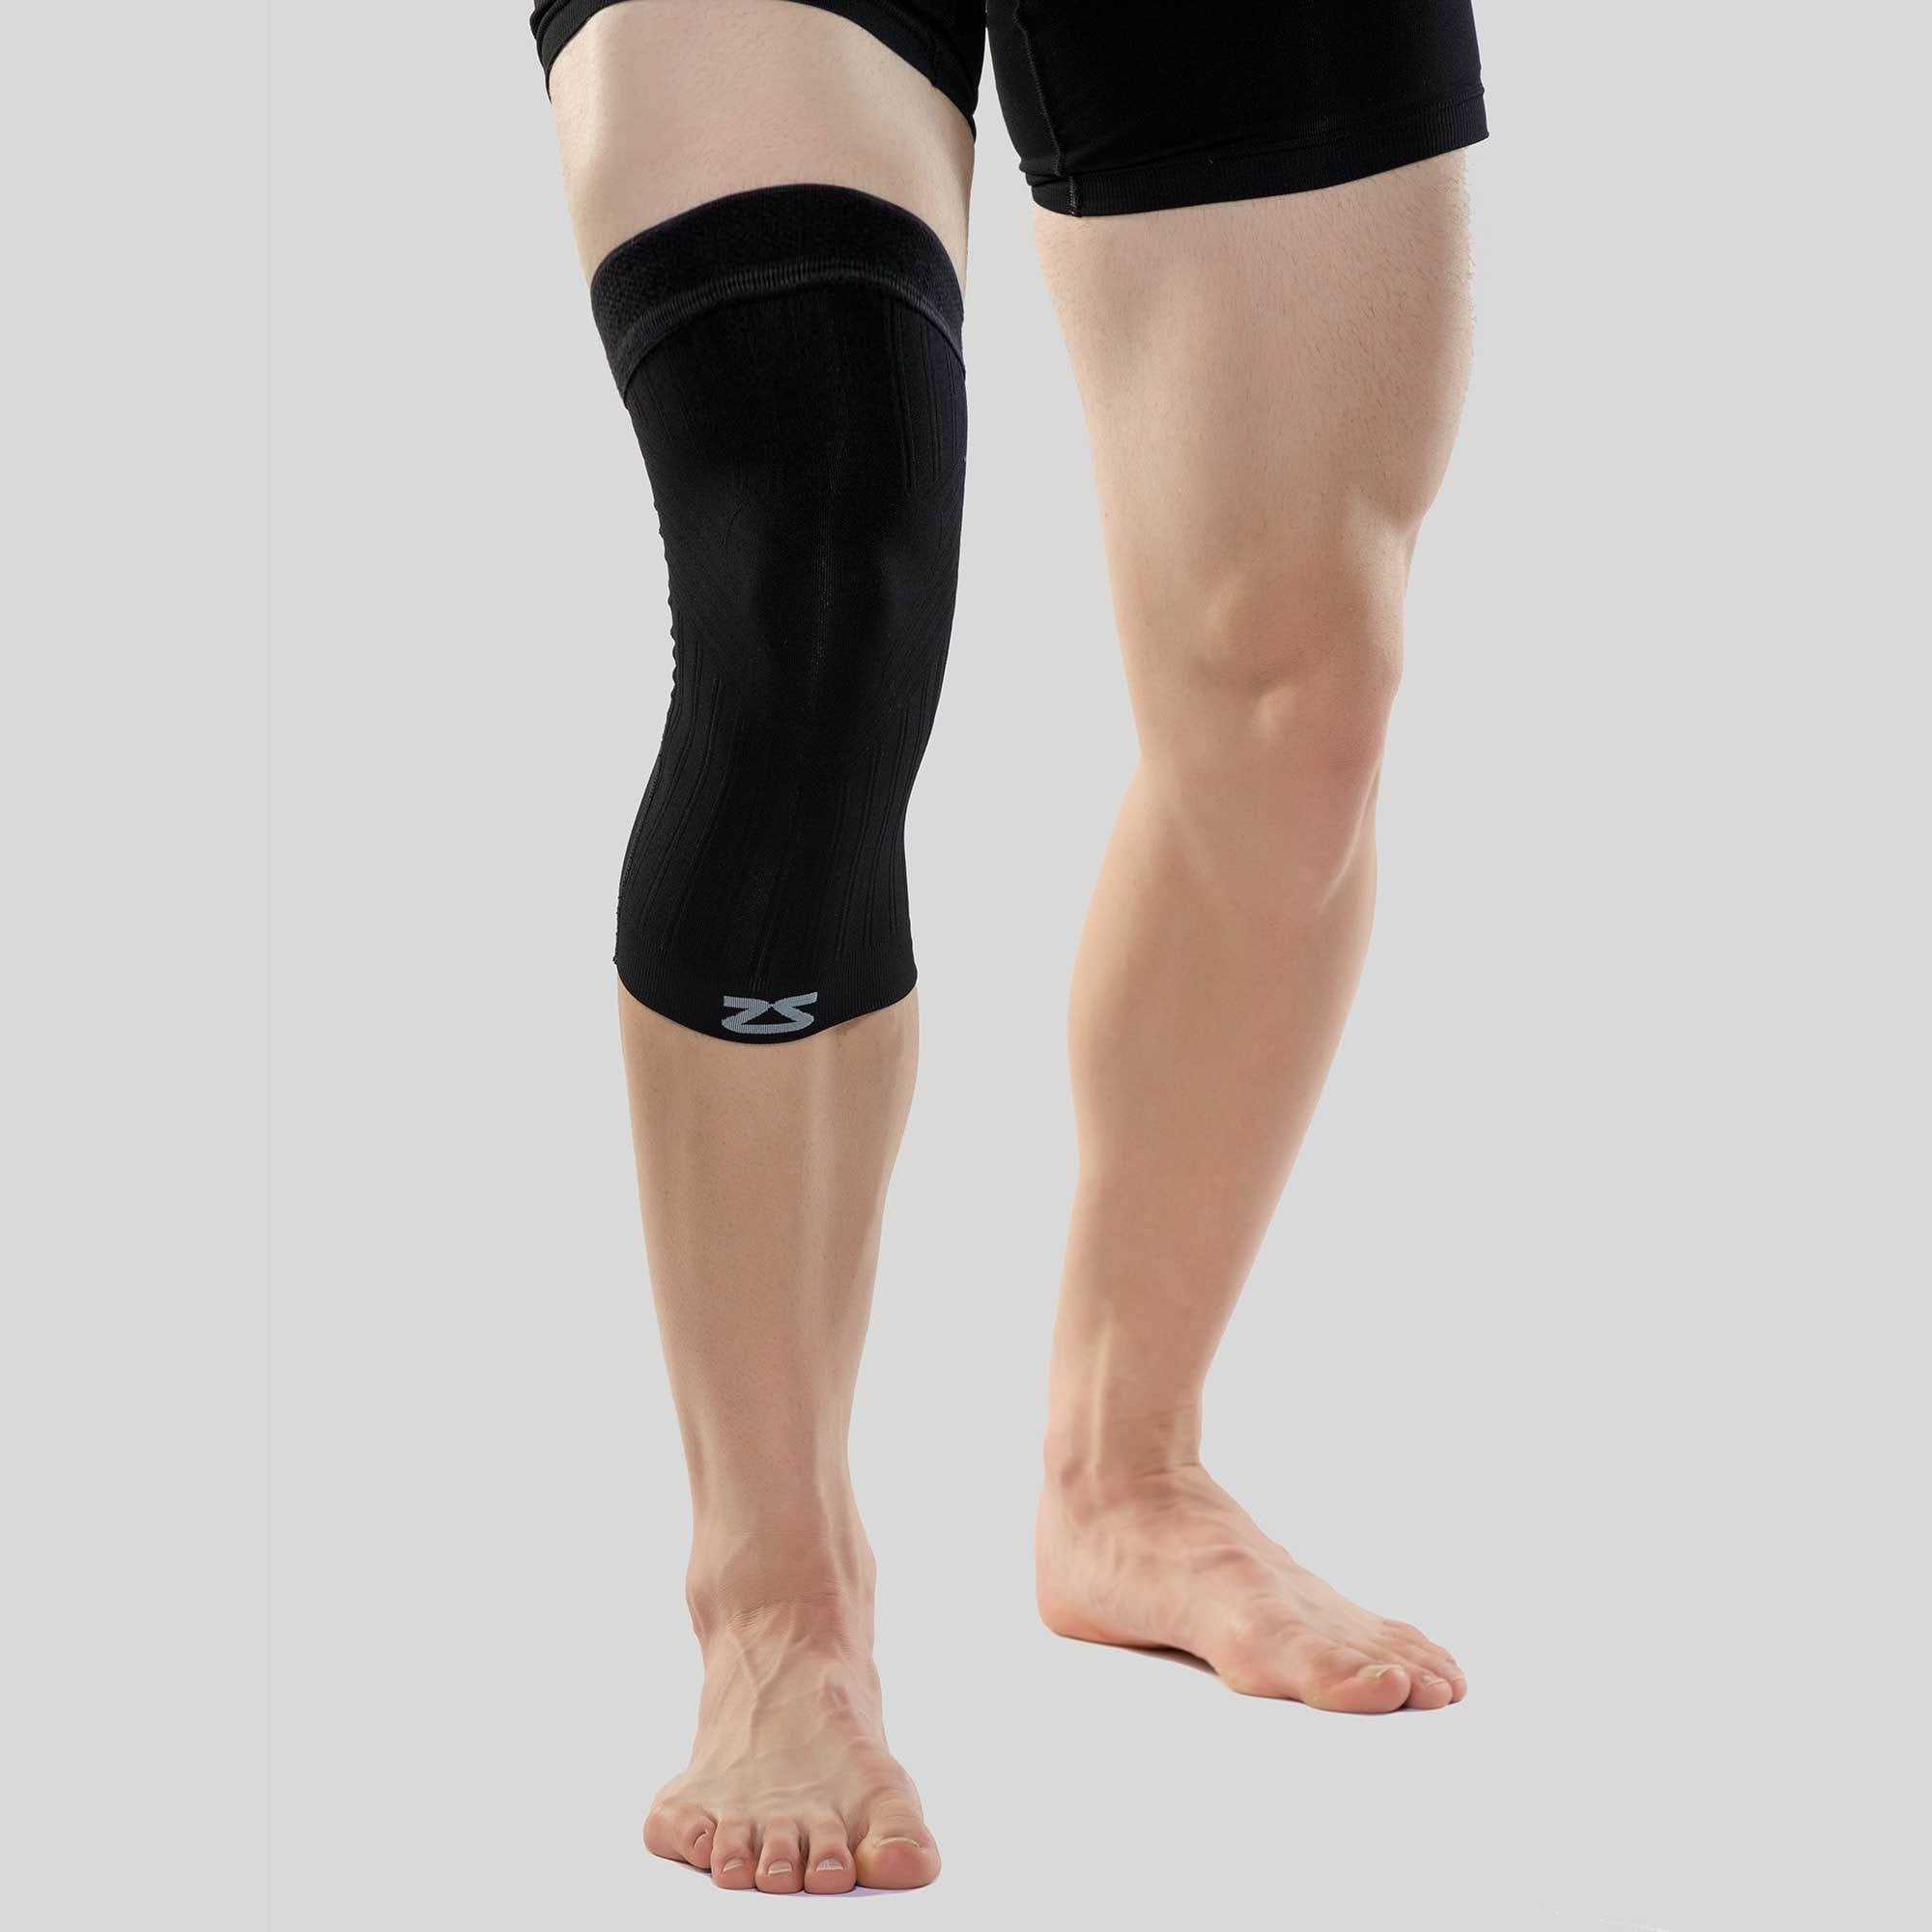 Sonew Adjustable Thigh Compression Support Sleeve Hamstring Thin